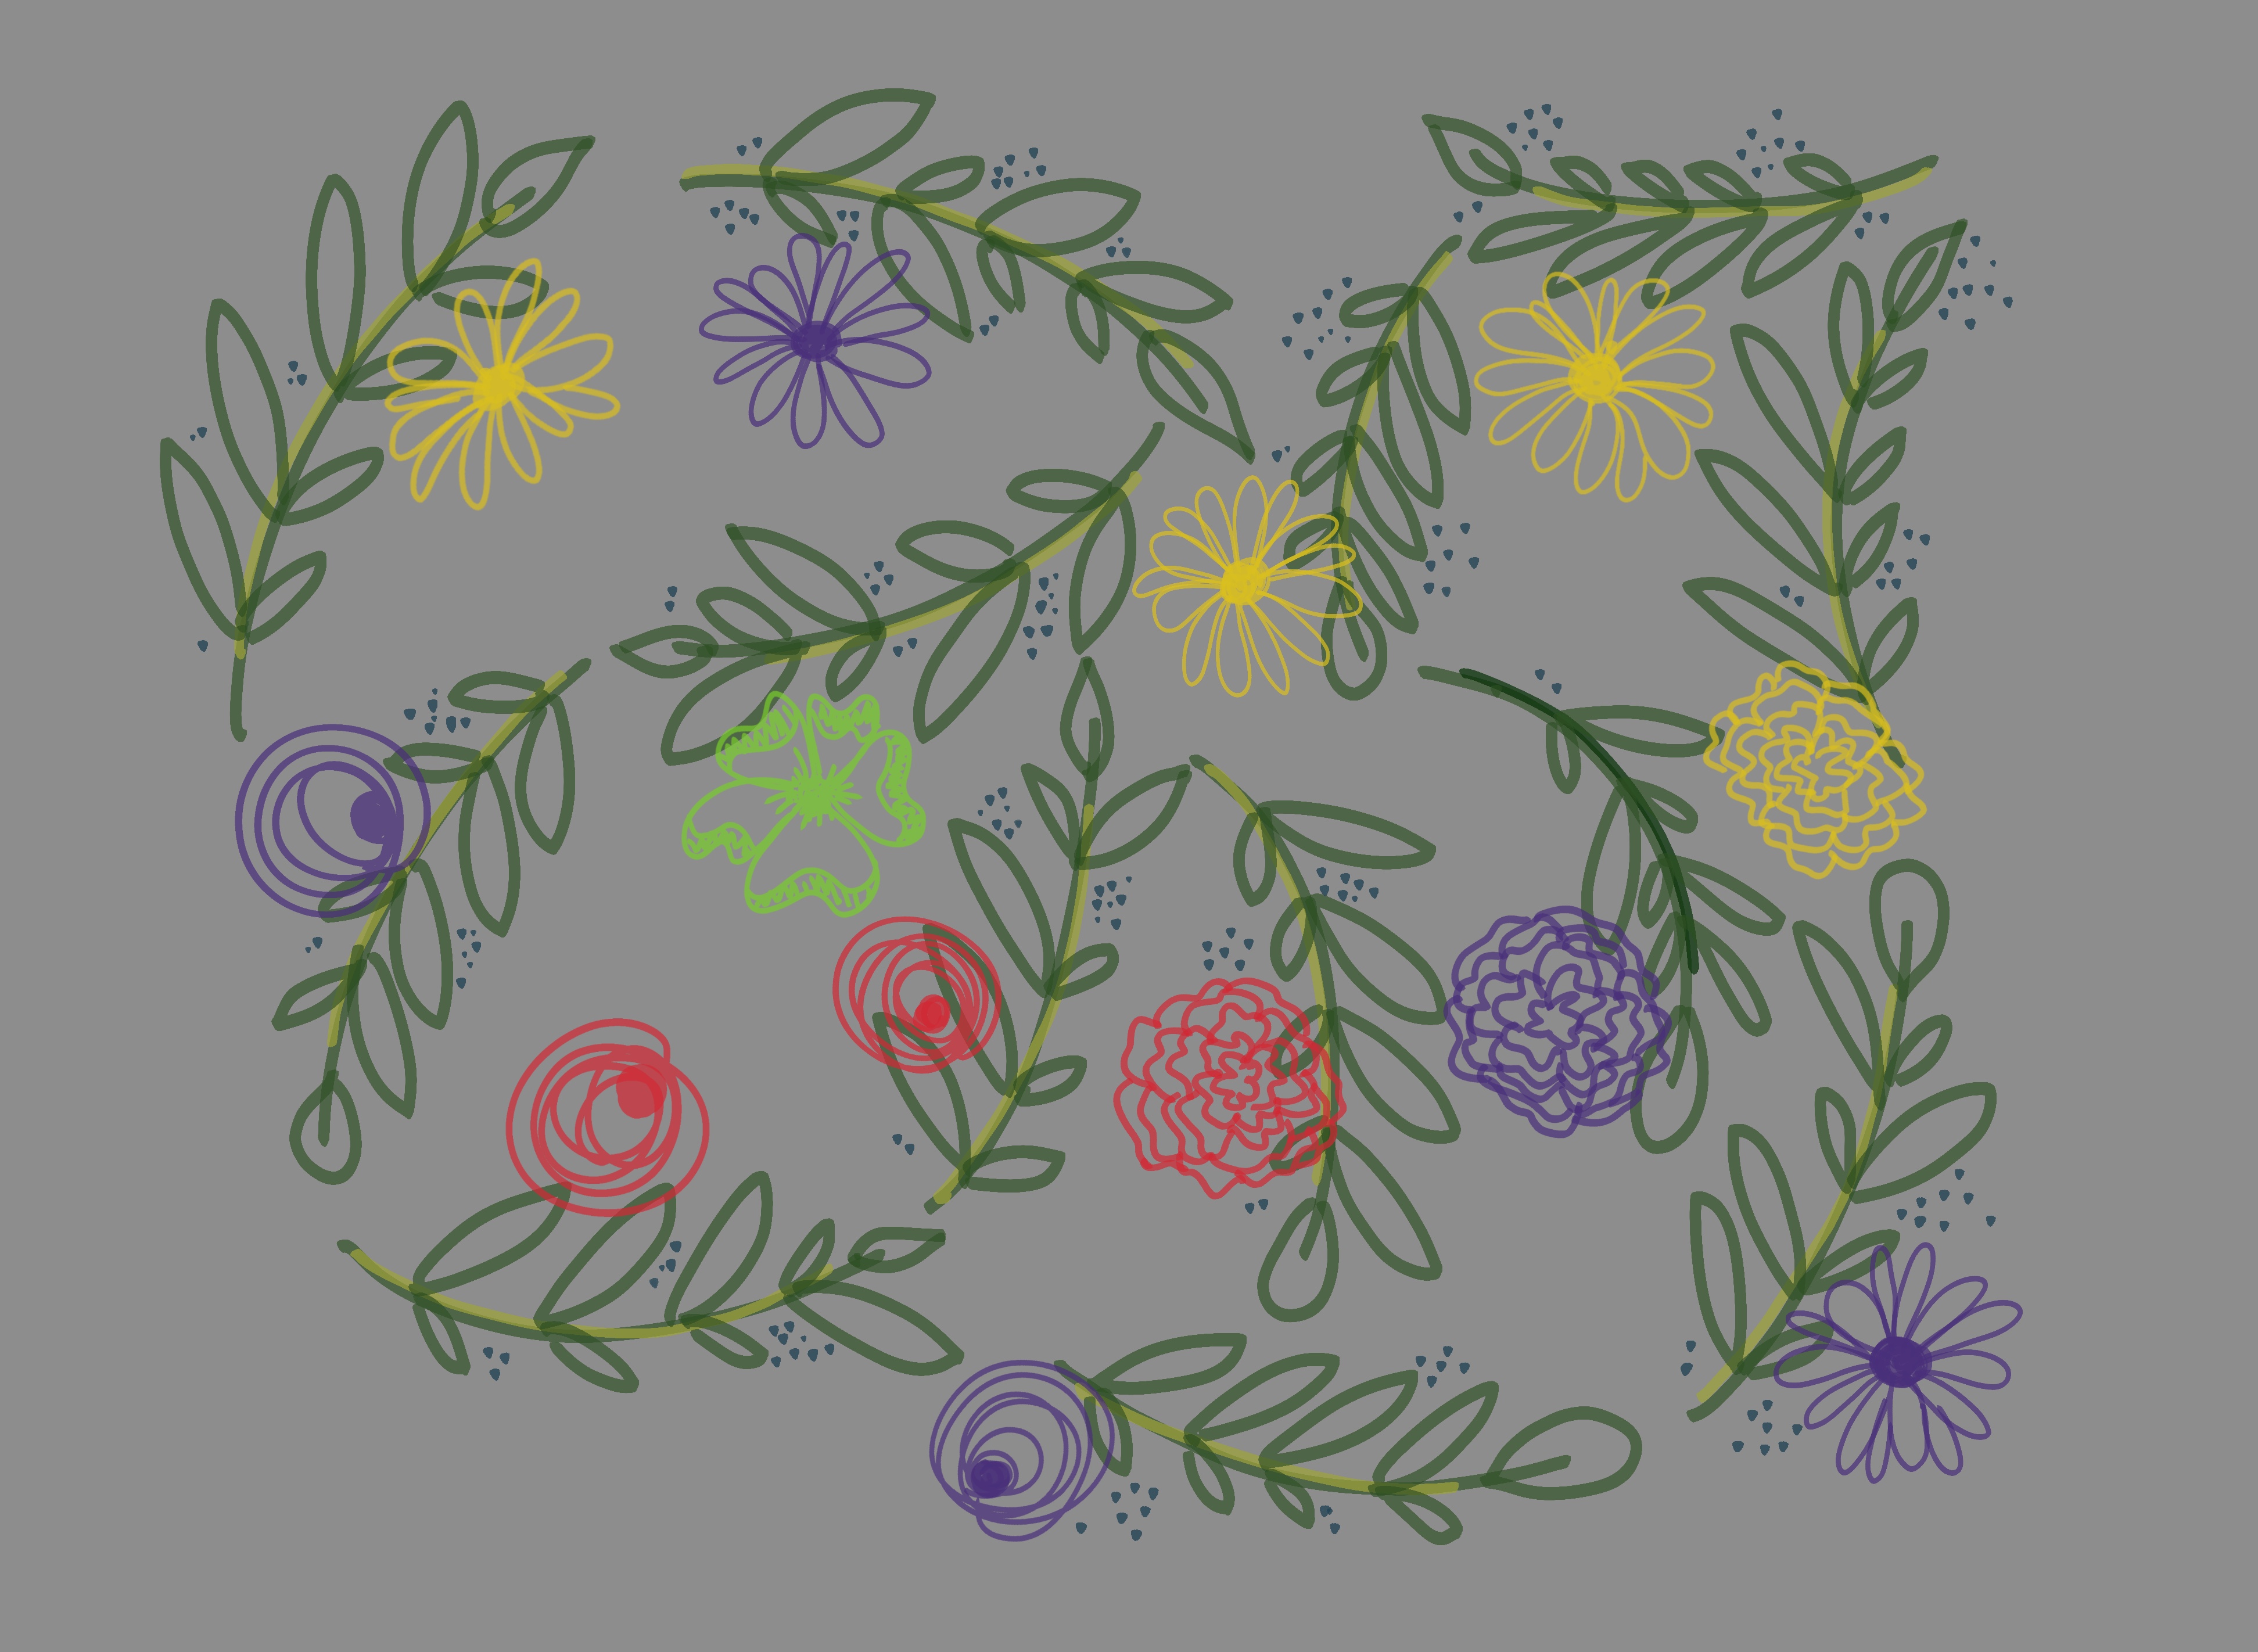 Floral inspired visualization with green, red, purple and yellow flowers on a gray background